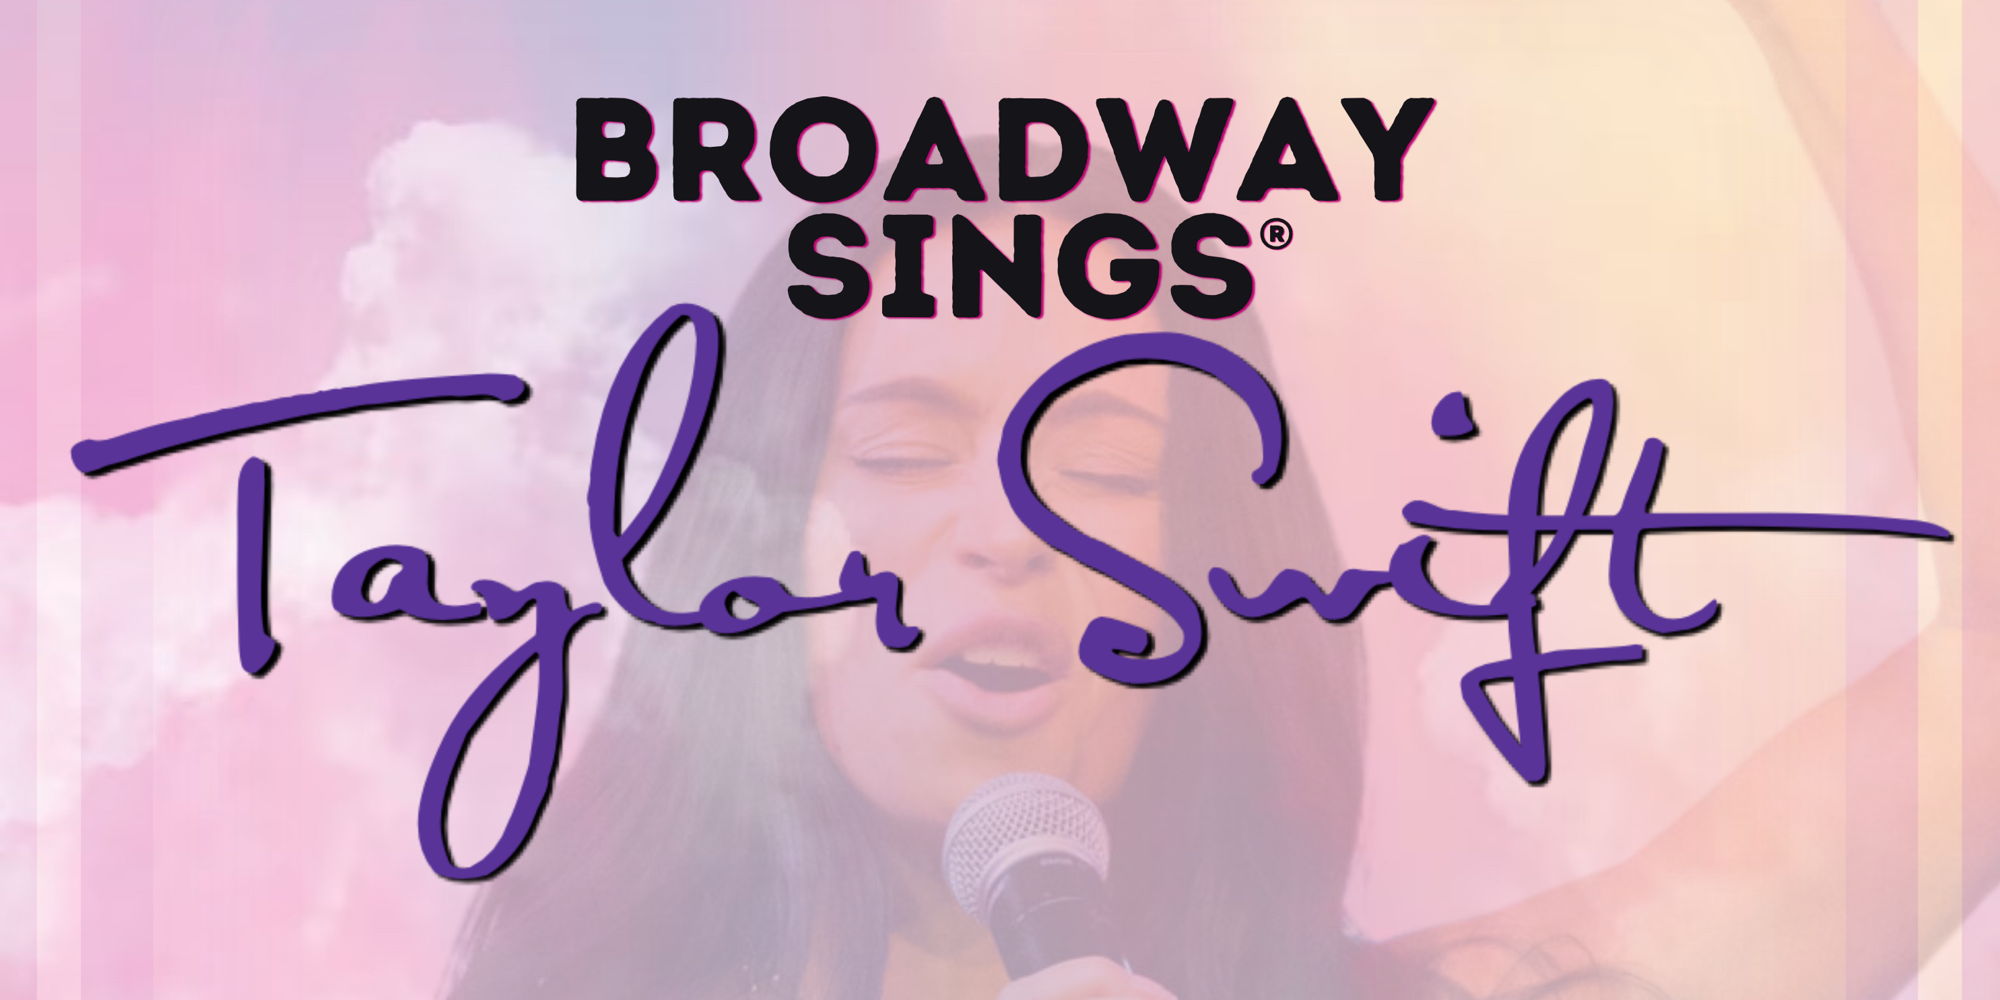 Broadway Sings Taylor Swift with a Live Orchestra promotional image